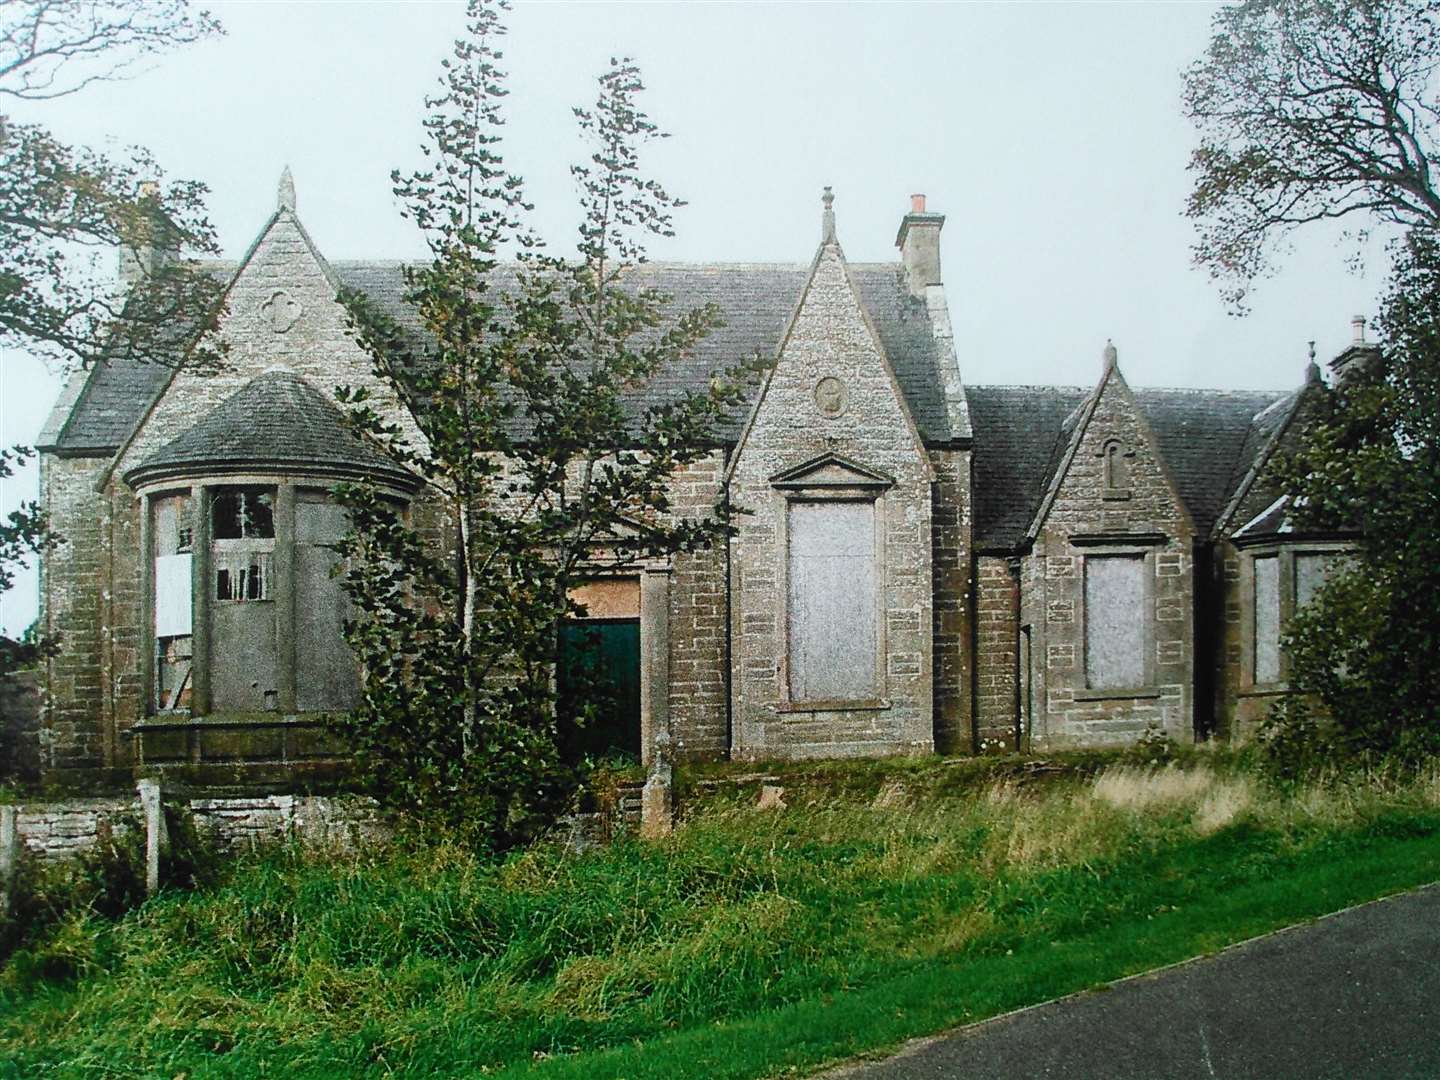 The Traill Hall has been valued at over £60,000.